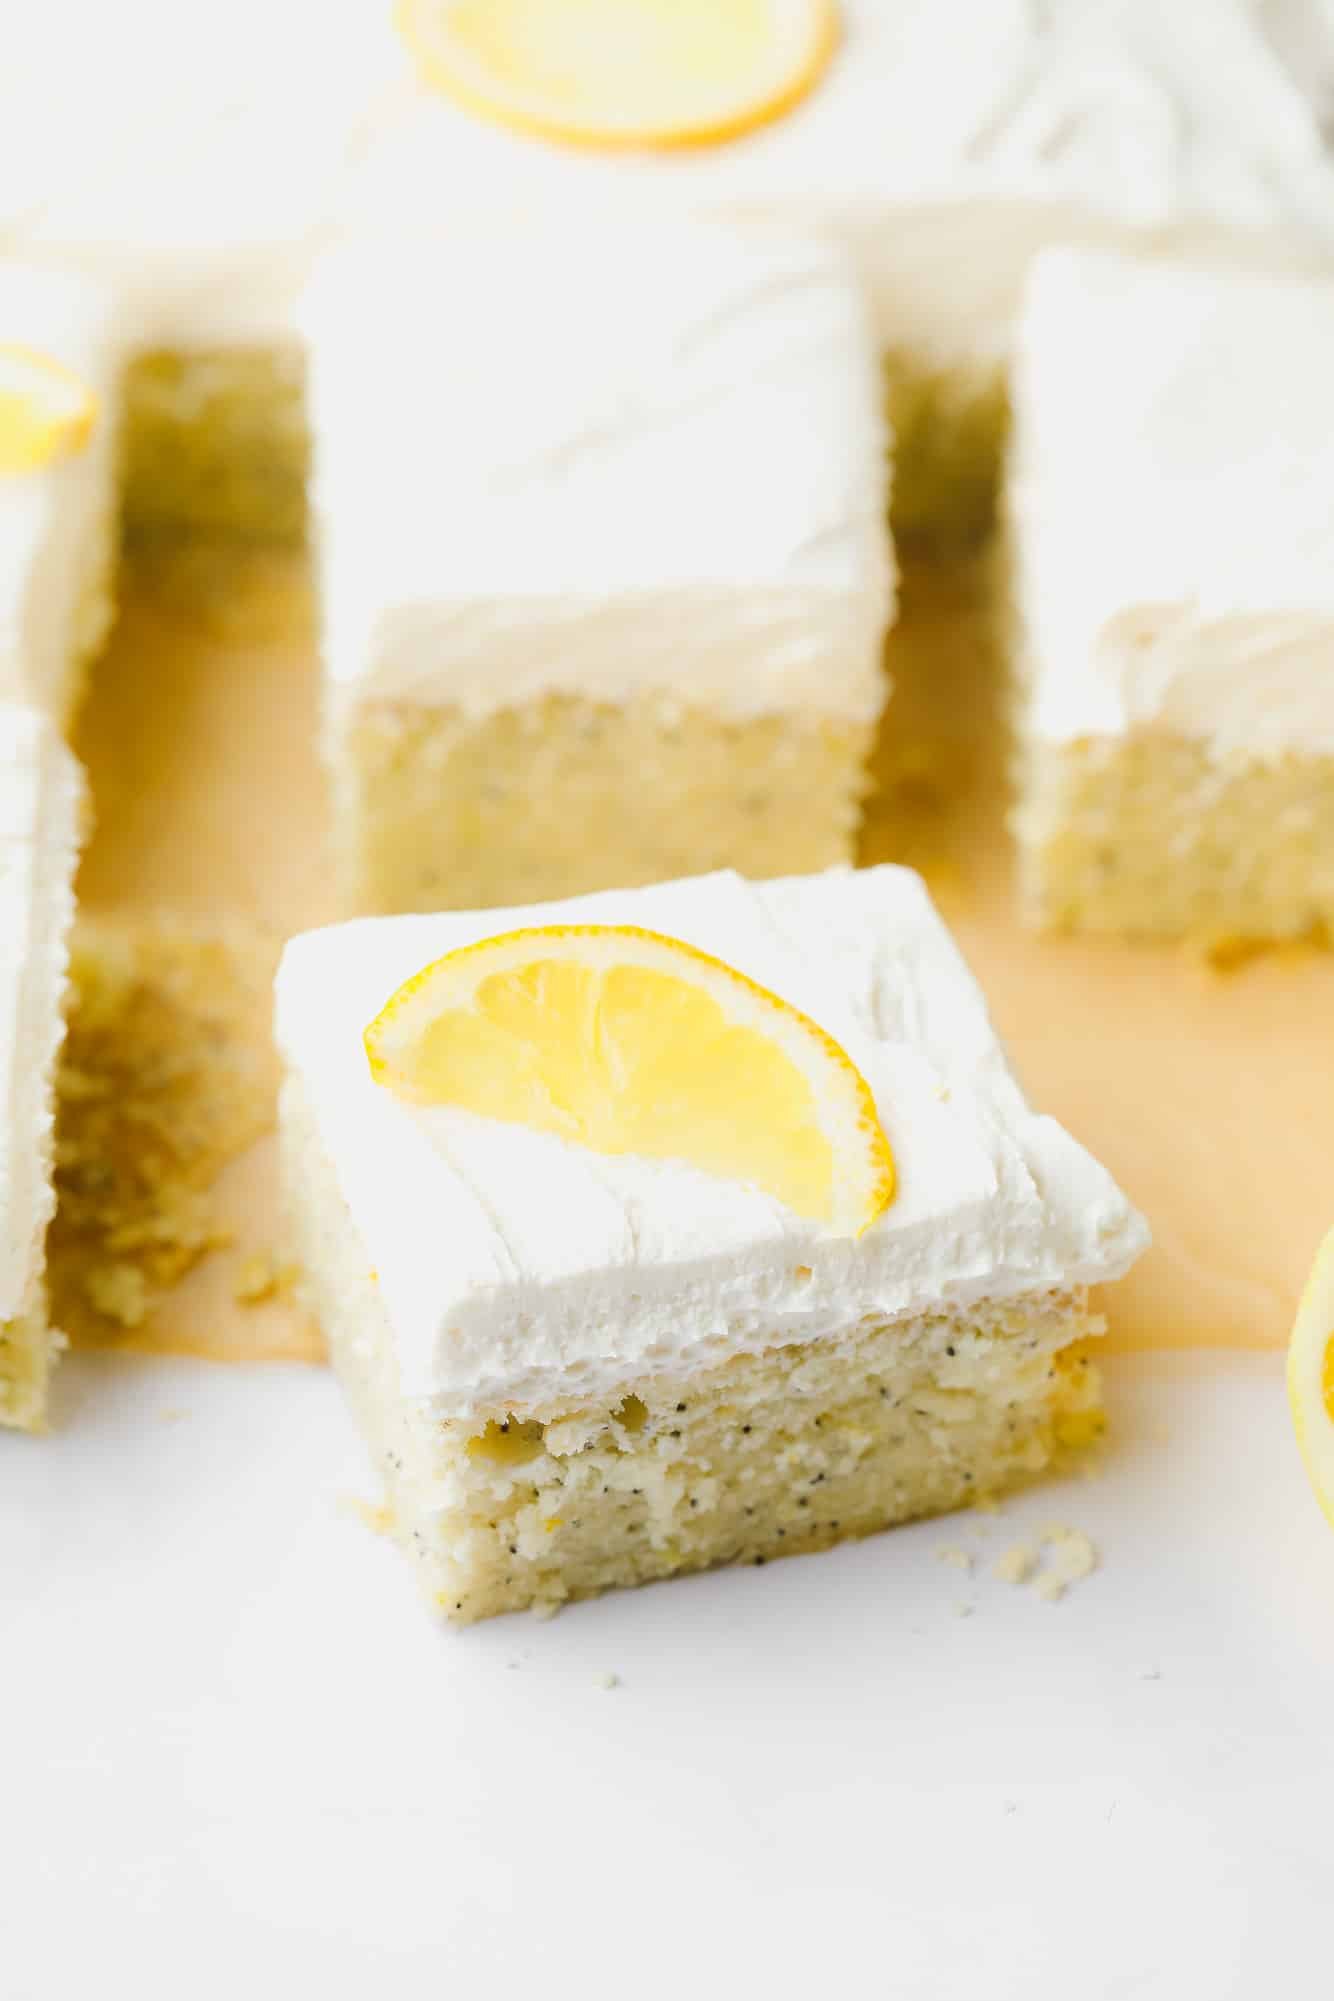 a slice of lemon poppyseed cake topped with a lemon slice cut from a larger cake.